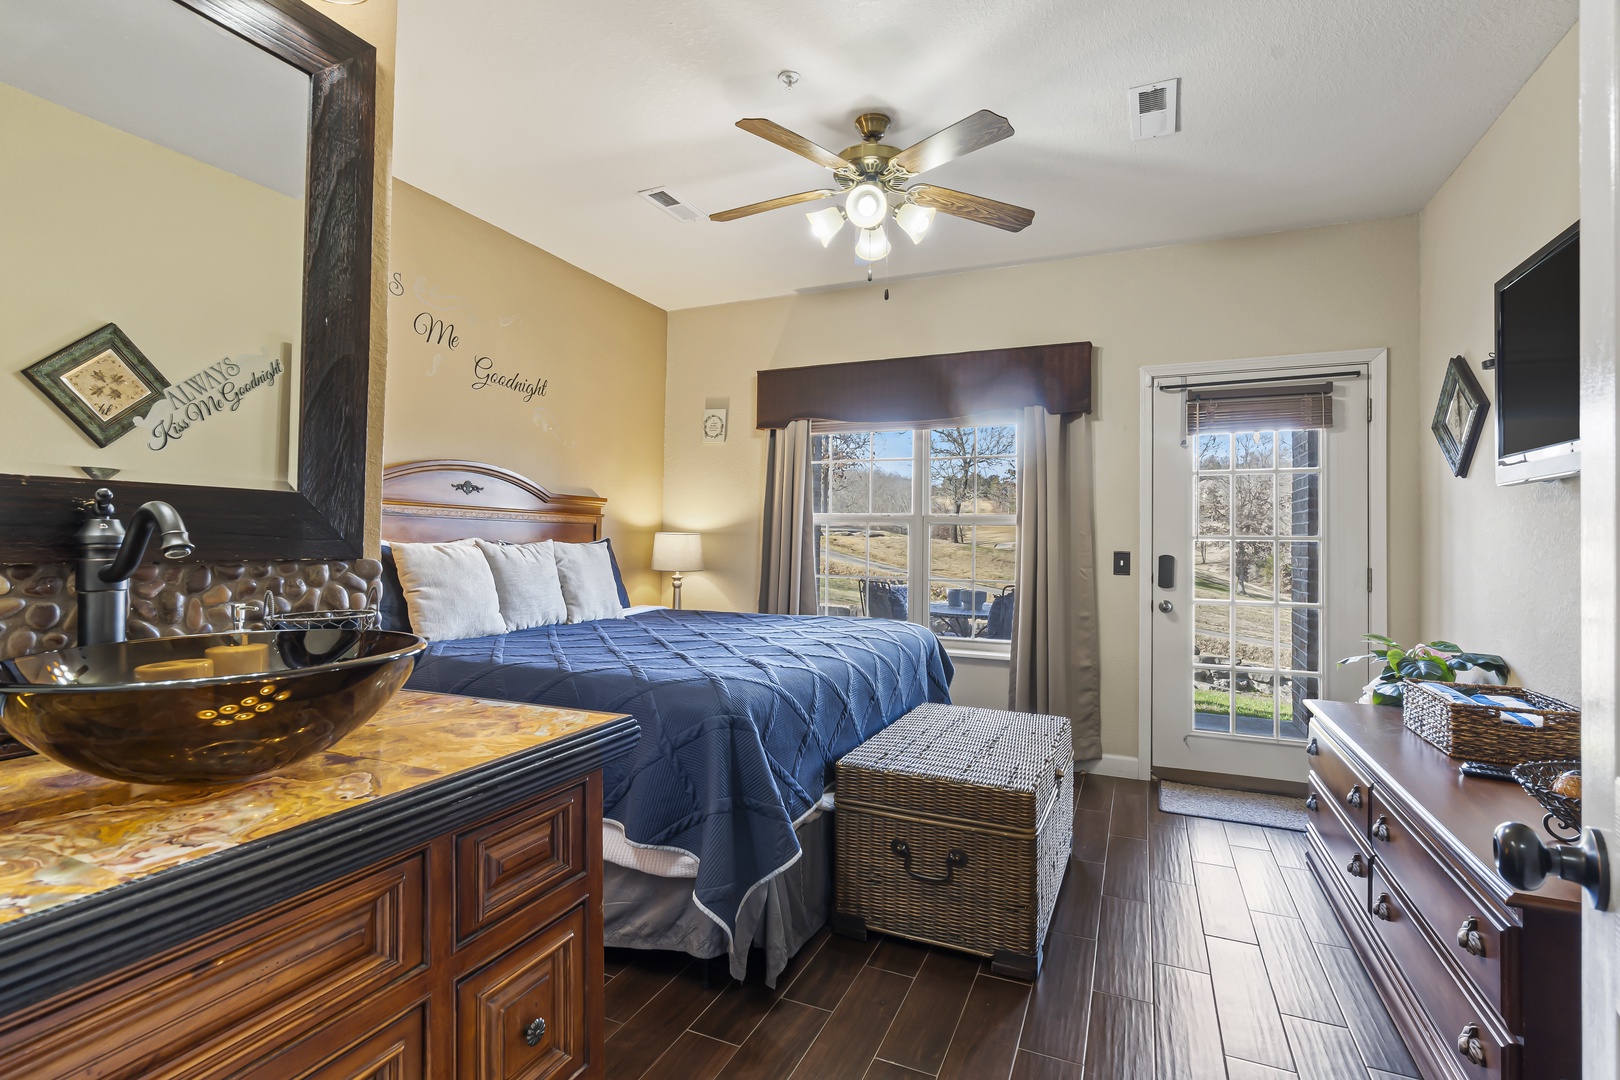 The bedroom includes a regal king bed, Smart TV, & patio access